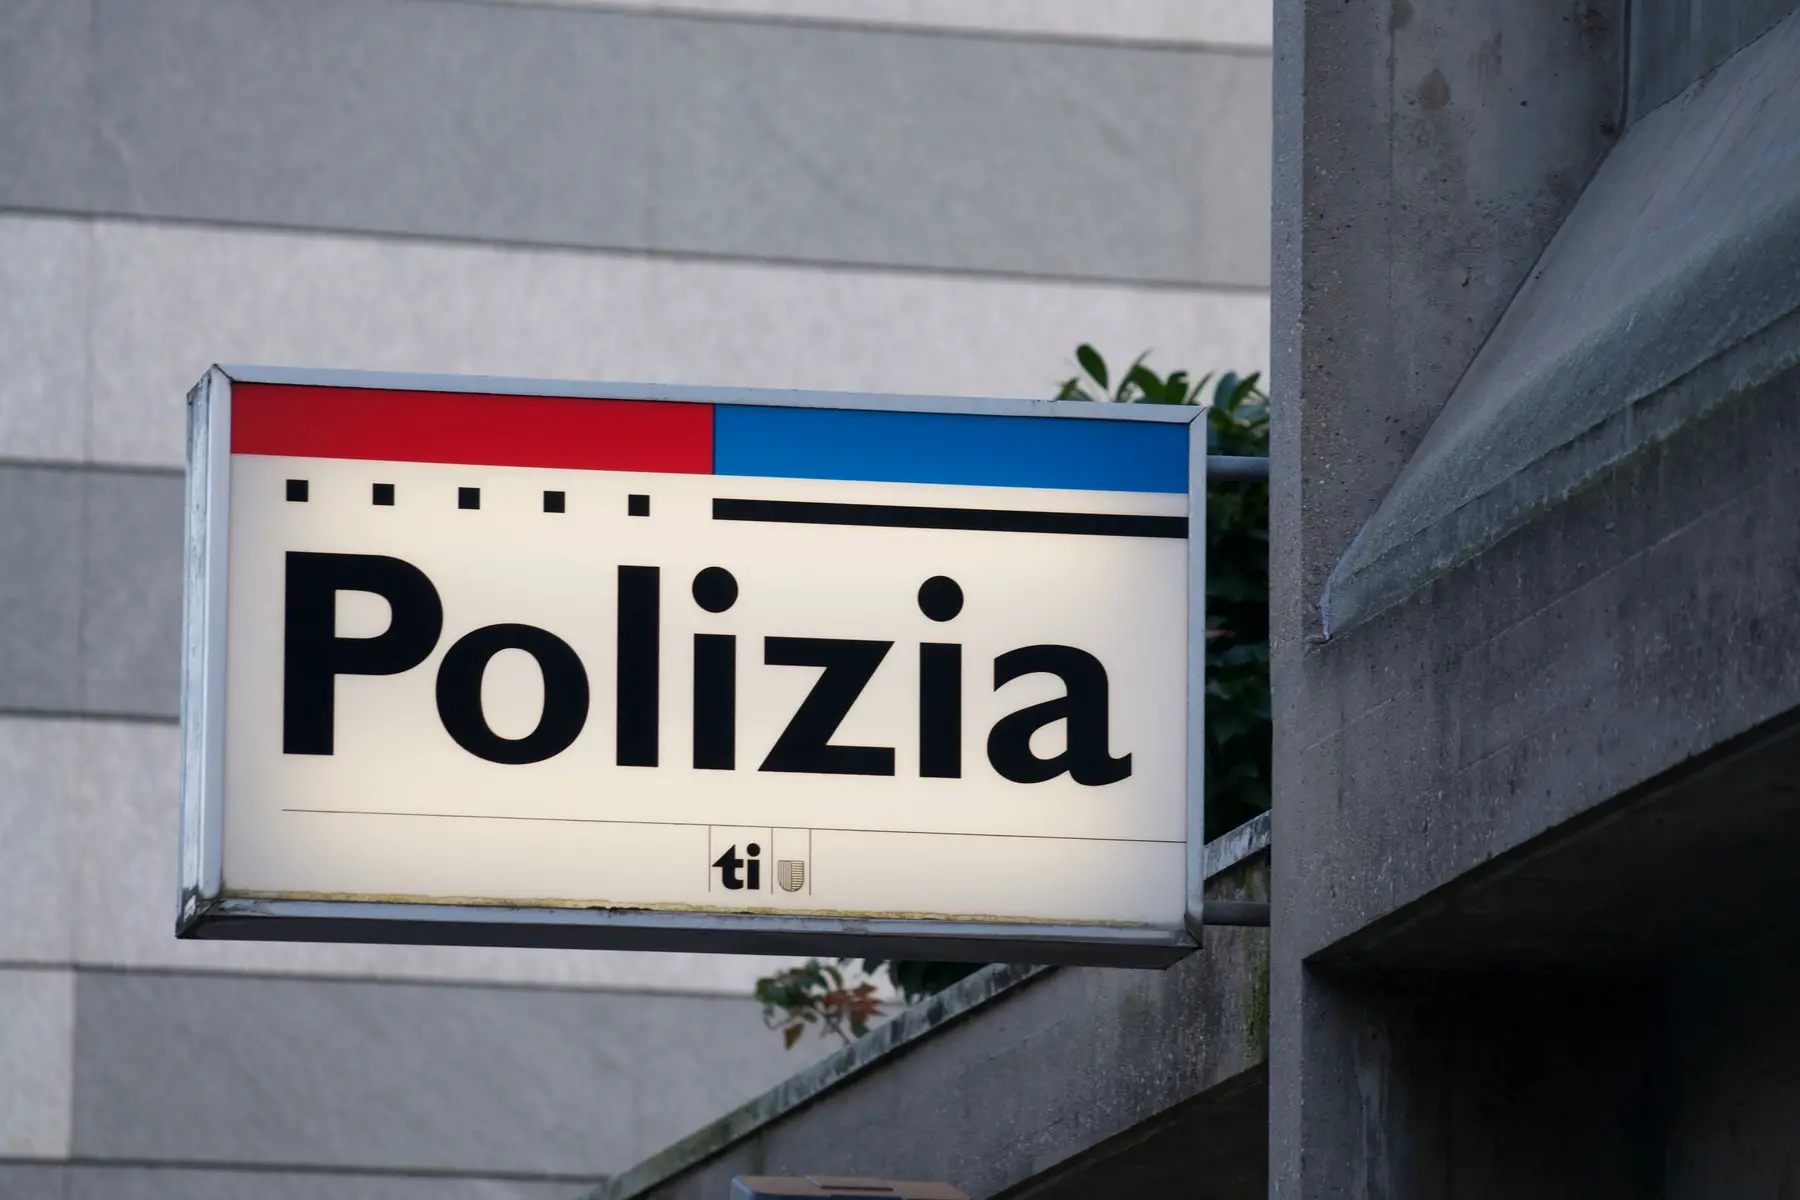 Sign at a police station in Ticino, Switzerland